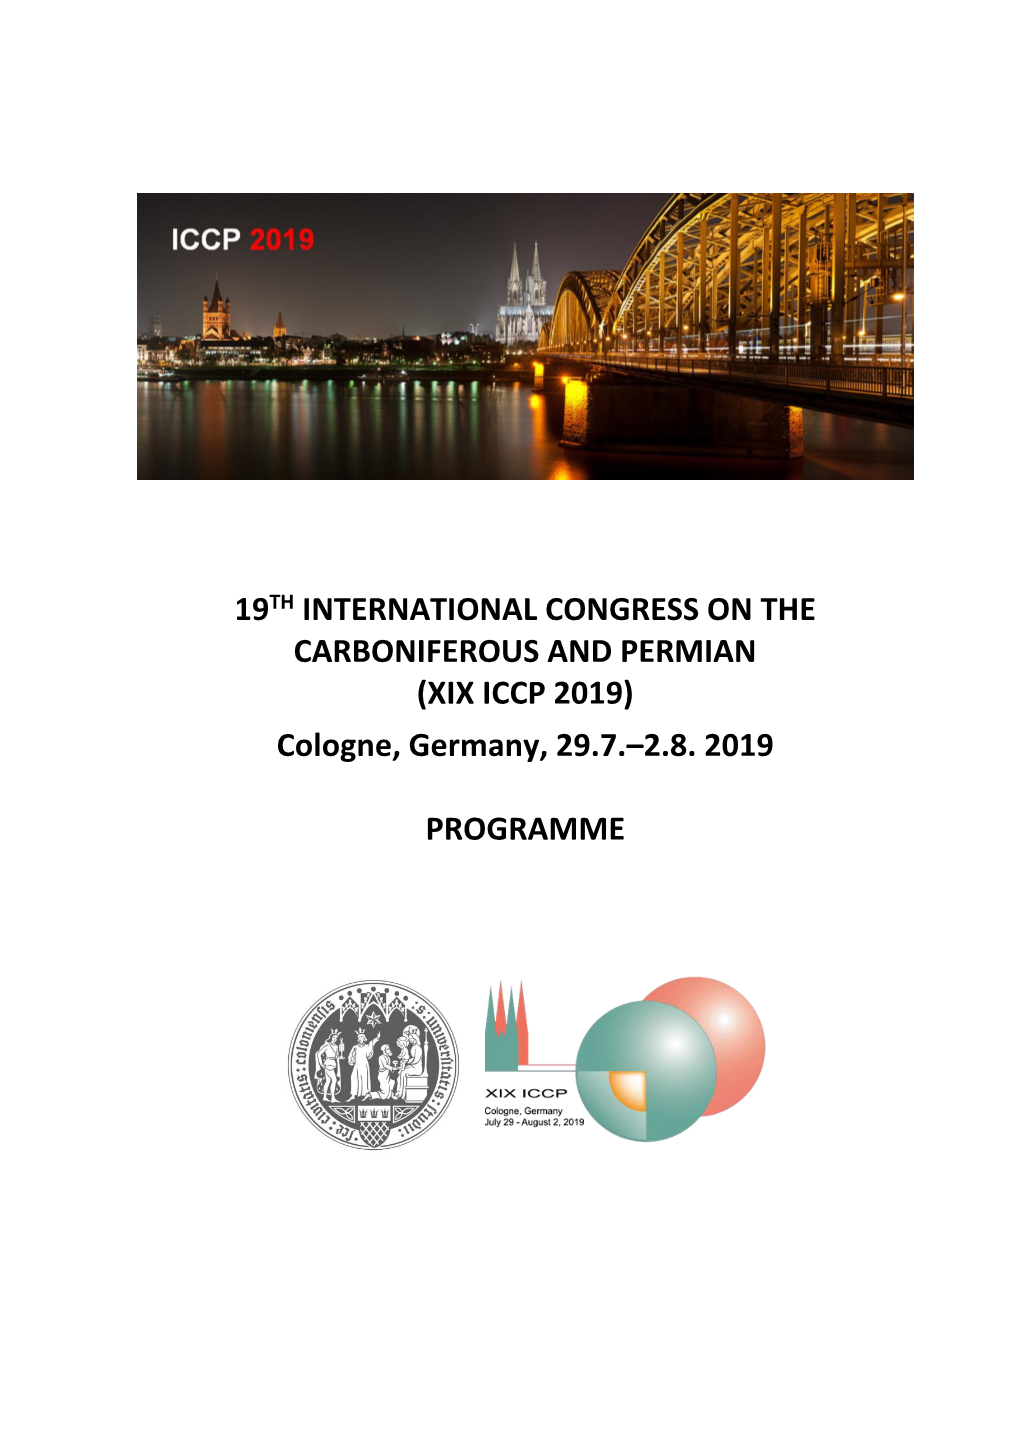 (XIX ICCP 2019) Cologne, Germany, 29.7.–2.8. 2019 PROGRAMME